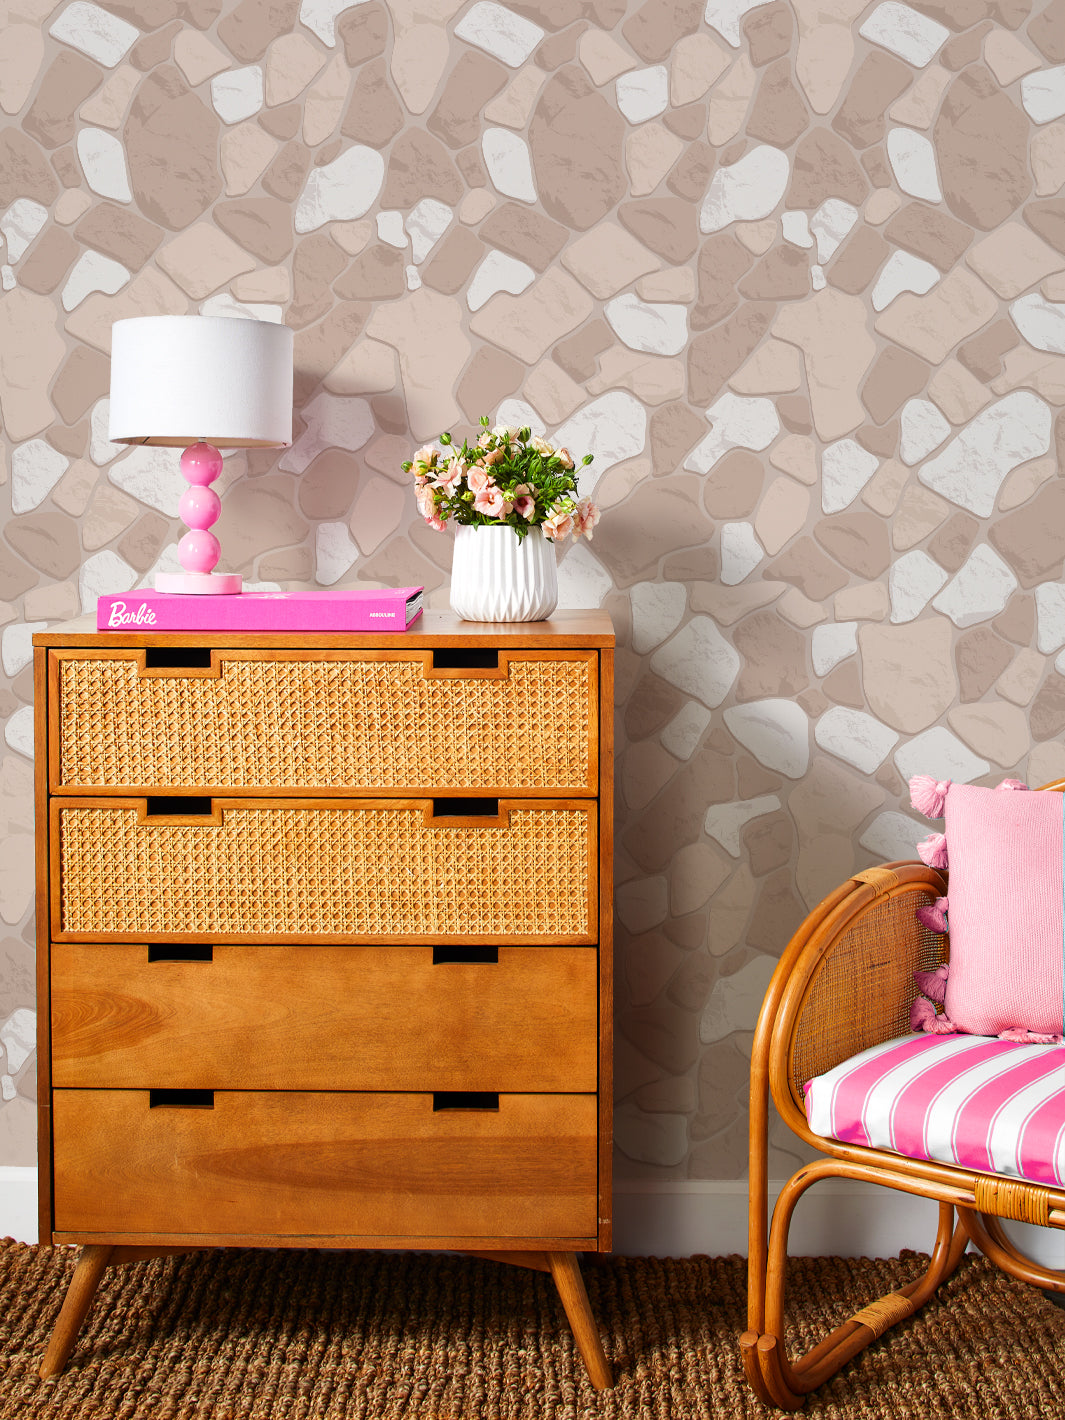 'Barbie™ Rock Wall' Wallpaper by Barbie™ - Taupes